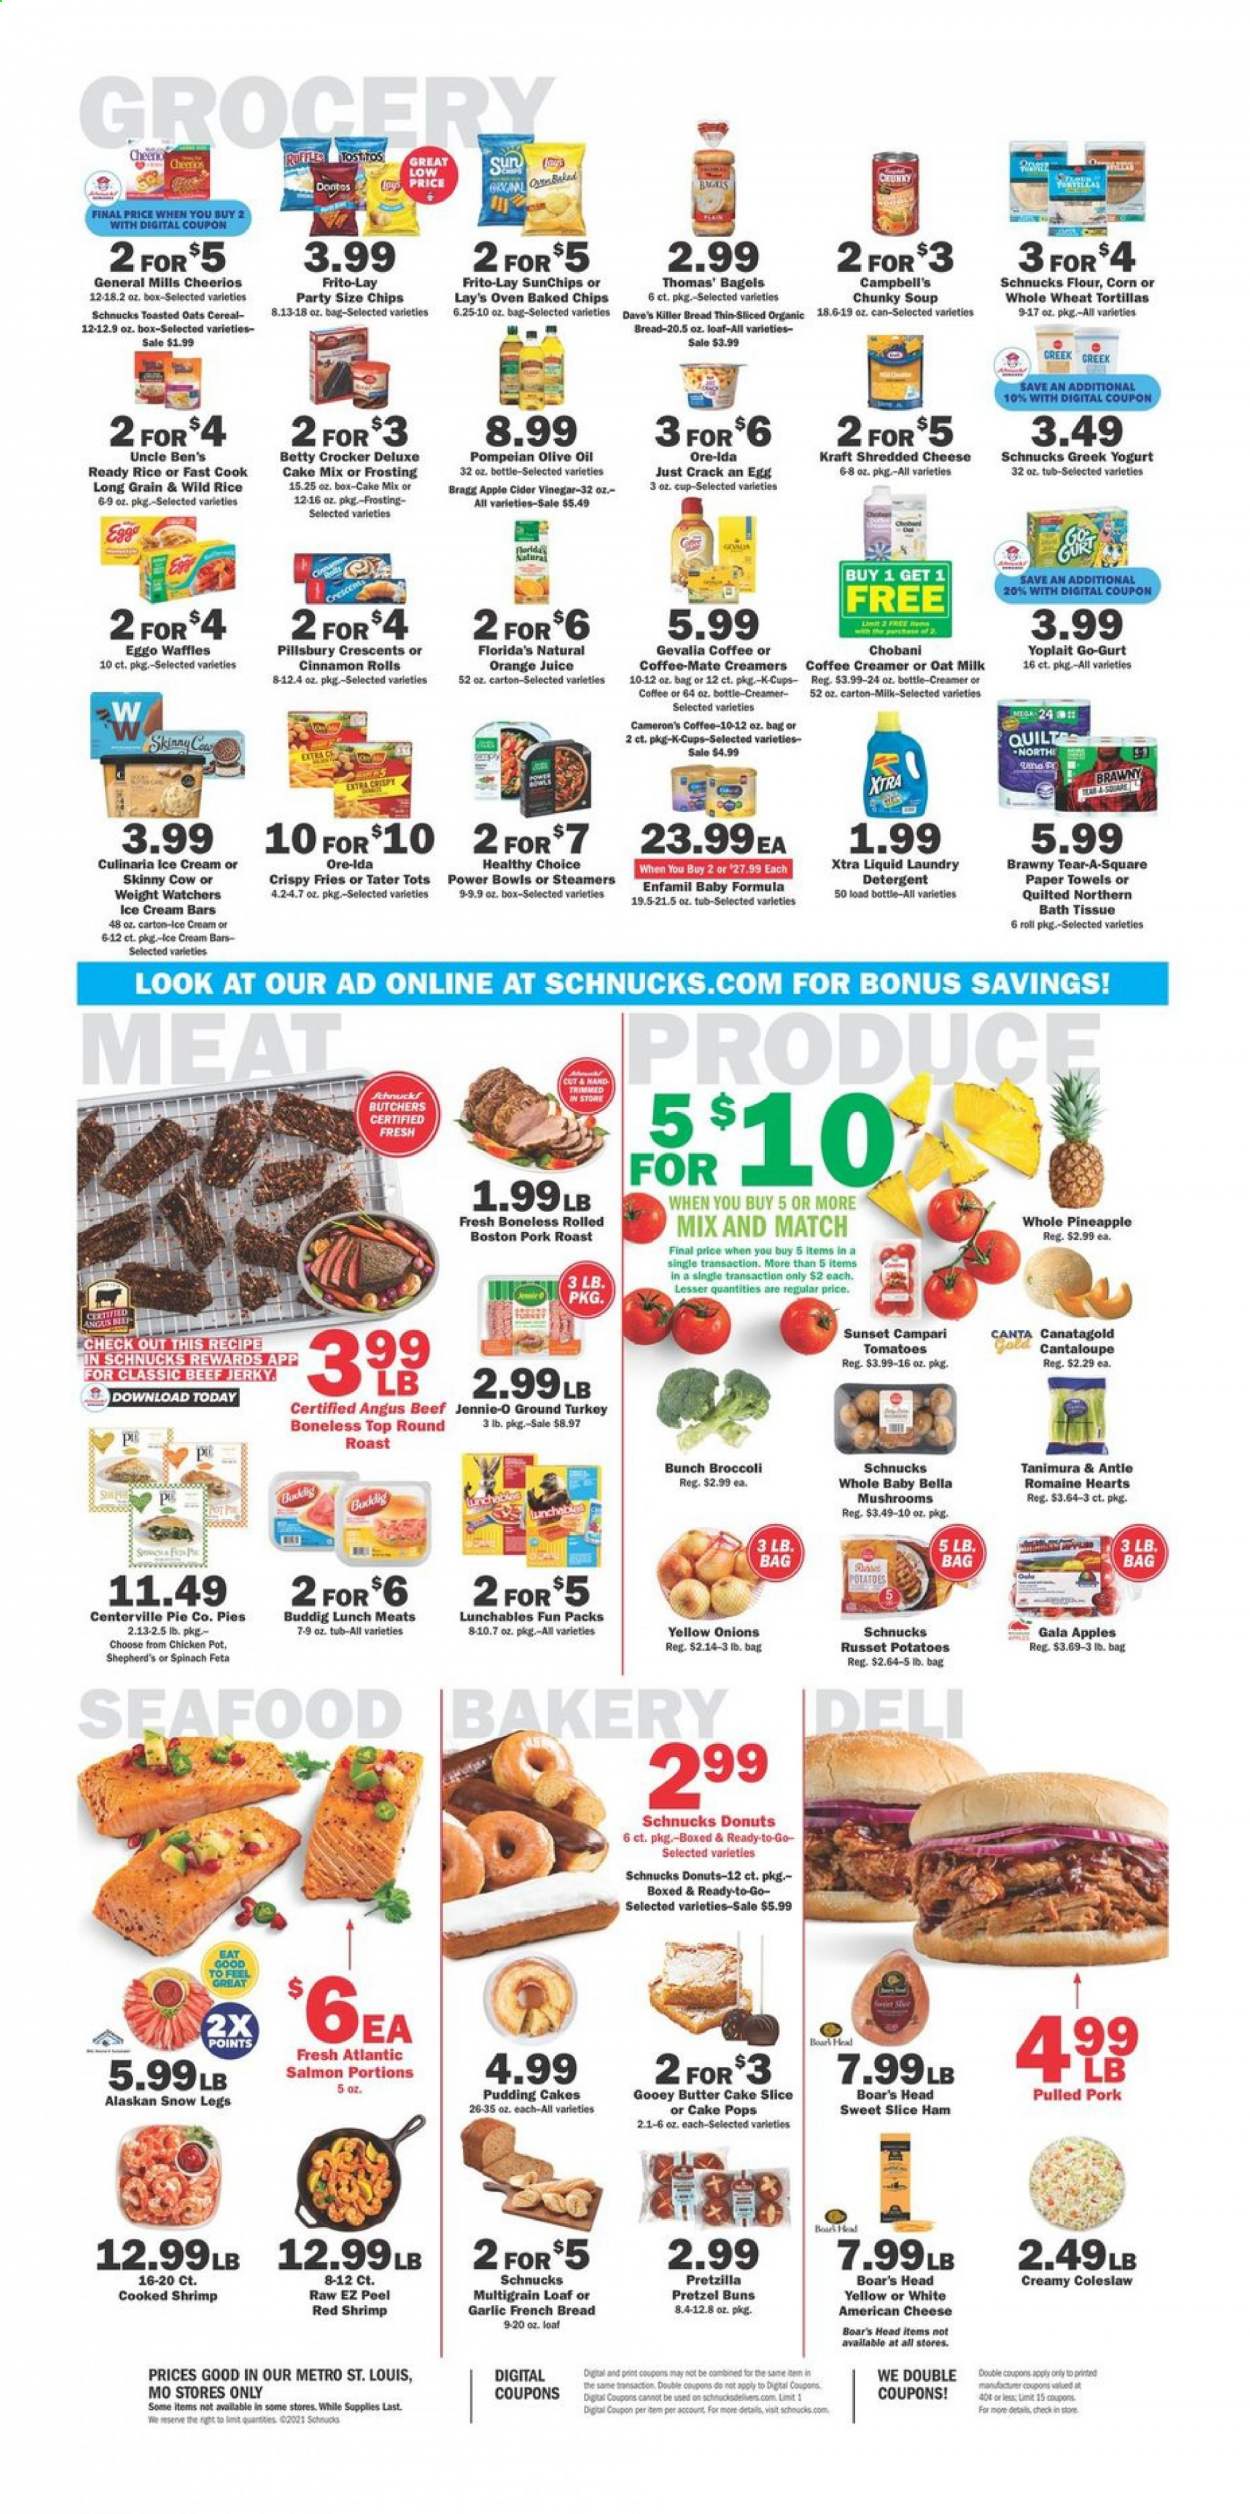 thumbnail - Schnucks Flyer - 01/13/2021 - 01/19/2021 - Sales products - cantaloupe, bread, tortillas, pretzels, bagels, cake mix, cinnamon roll, pie, donut, buns, waffles, butter cake, salmon, seafood, shrimps, Campbell's, coleslaw, soup, Pillsbury, Healthy Choice, Lunchables, Kraft®, beef jerky, ham, jerky, american cheese, shredded cheese, feta, greek yoghurt, yoghurt, Yoplait, Chobani, Coffee-Mate, milk, oat milk, butter, creamer, coffee and tea creamer, ice cream, ice cream bars, corn, spinach, potato fries, Ore-Ida, Florida's Natural, chips, Lay’s, Frito-Lay, Ruffles, flour, frosting, garlic, Uncle Ben's, cereals, Cheerios, apple cider vinegar, olive oil, orange juice, juice, coffee capsules, K-Cups, Gevalia, Enfamil, ground turkey, beef meat, round roast, pork meat, pork roast, pulled pork, bath tissue, Bella, Quilted Northern, kitchen towels, paper towels, detergent, laundry detergent, XTRA. Page 4.